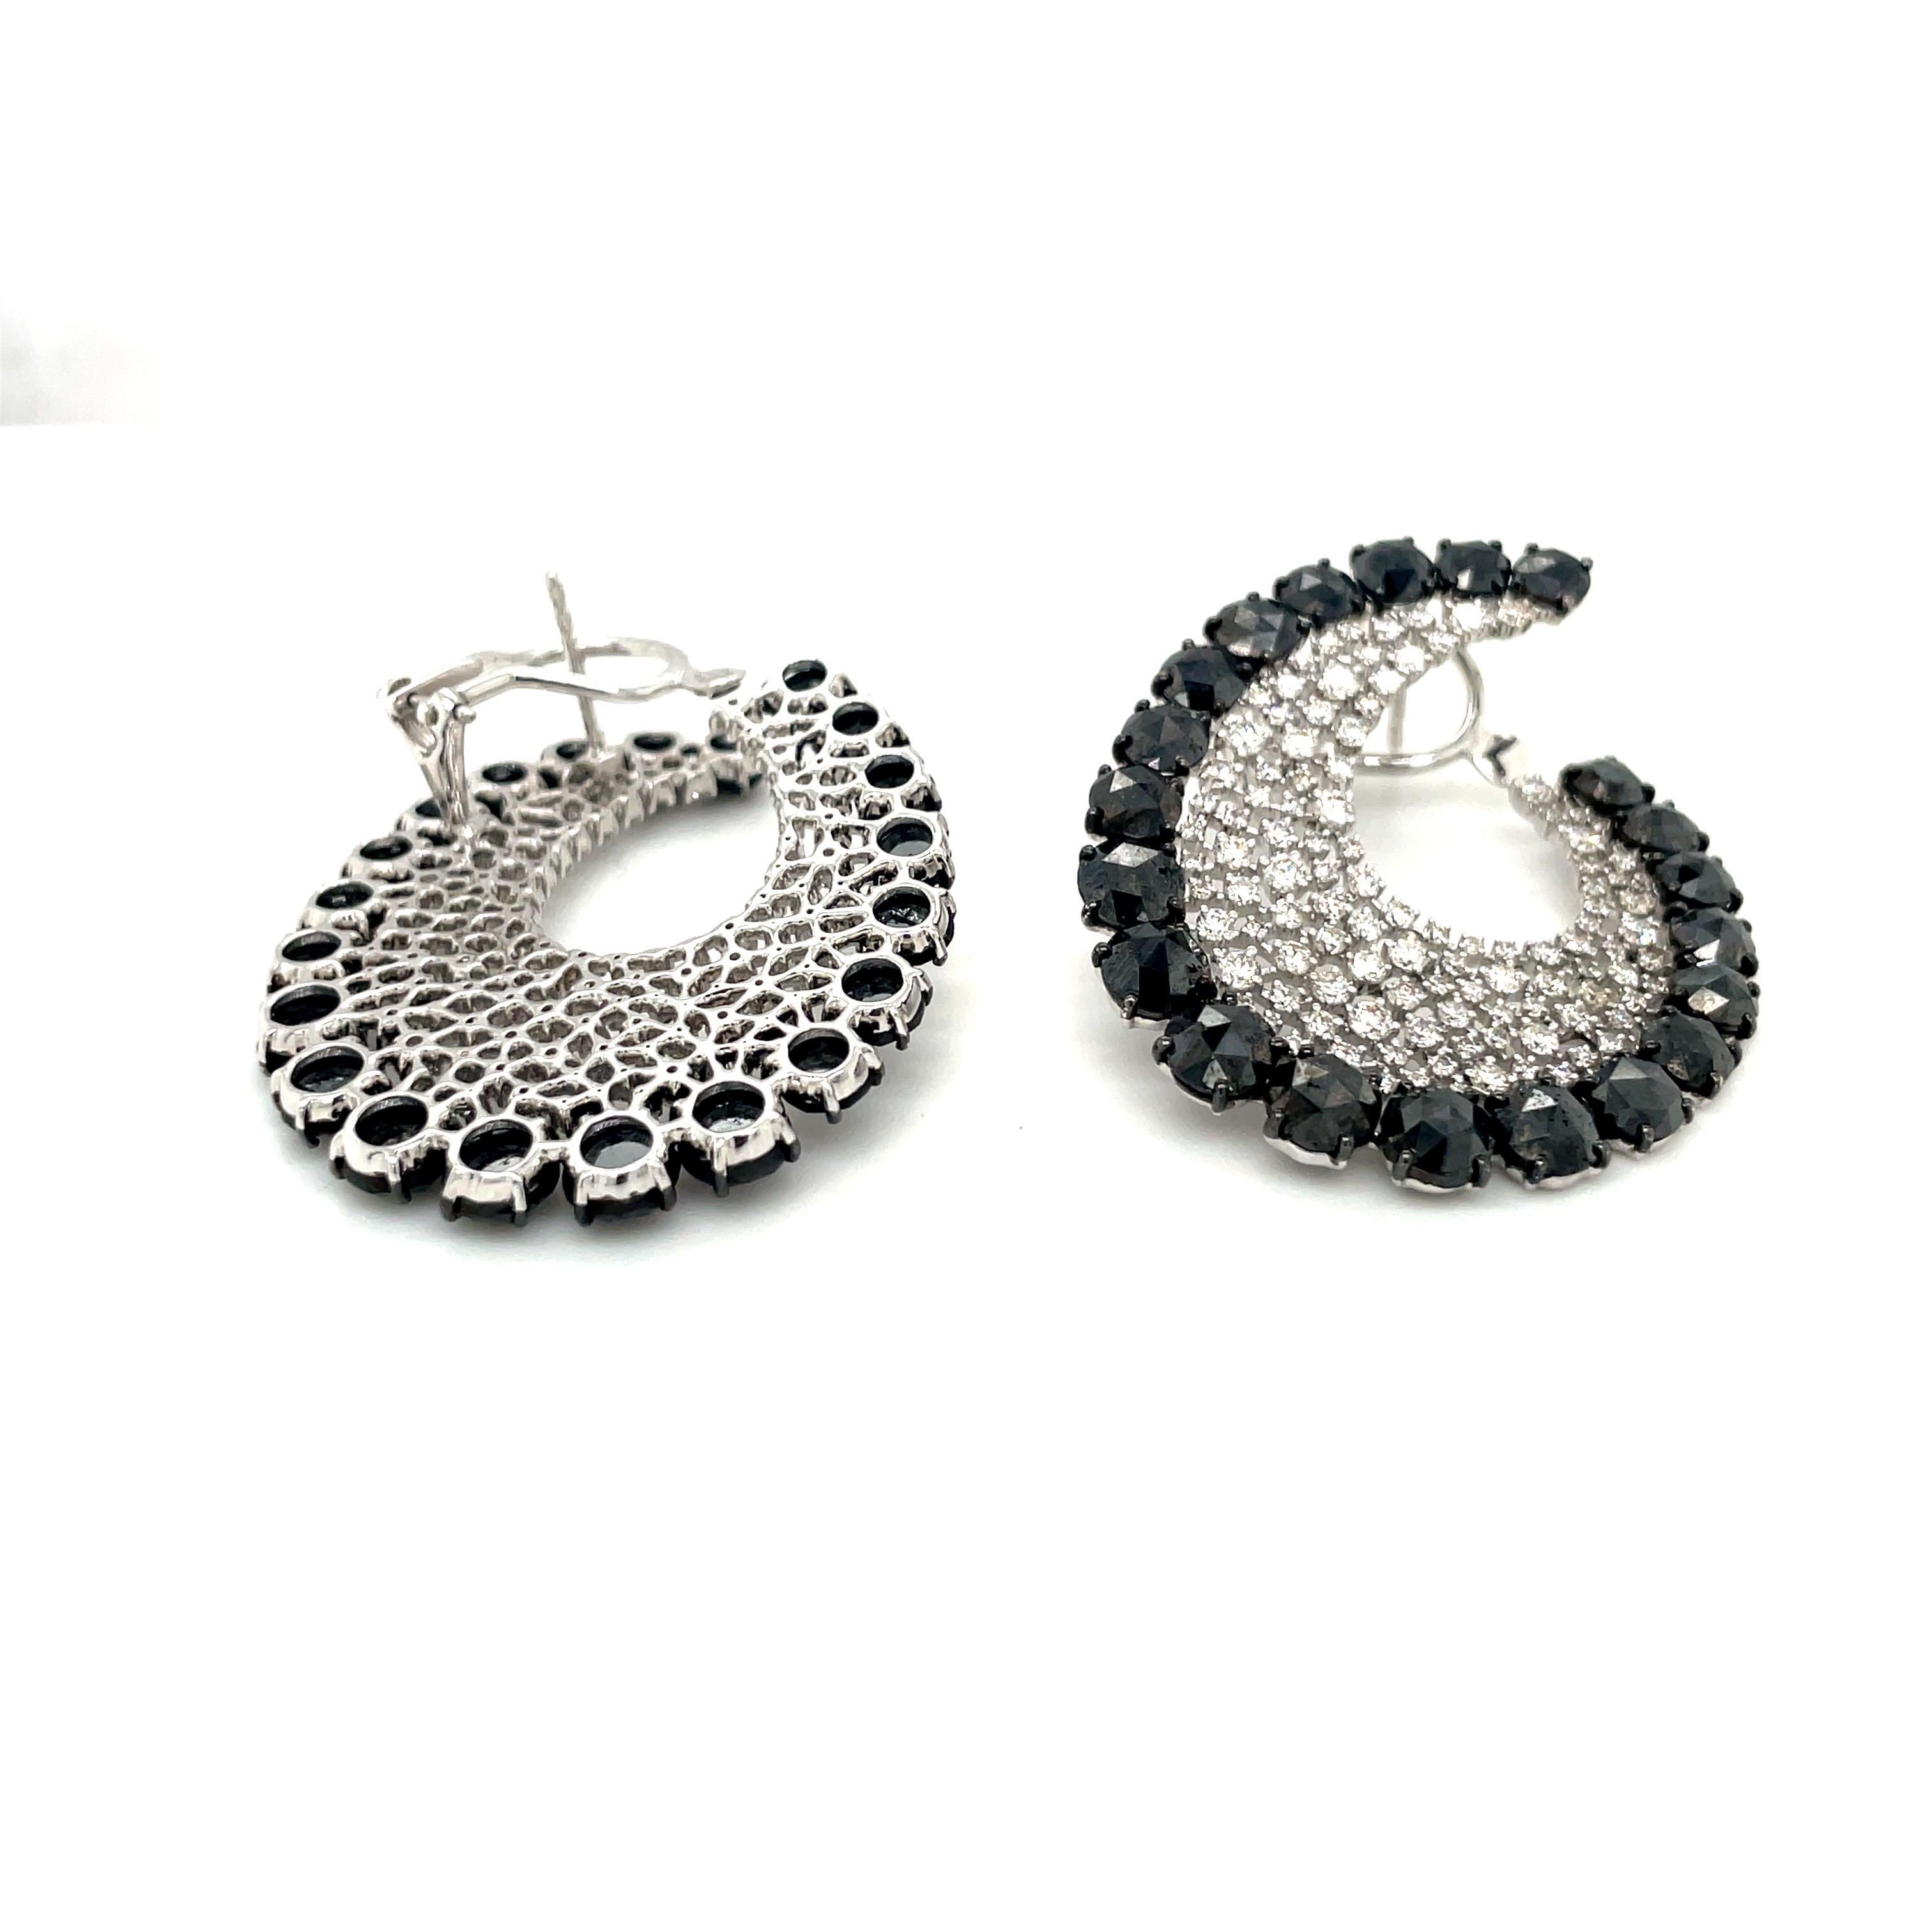 These Scintilla earrings by Sutra feature a delicate web of round brilliant white diamonds edged with rose-cut black diamonds, set in 18-karat blackened white gold. Black and white diamonds total 18.84 carats. Earrings are approximately 1.25 inches